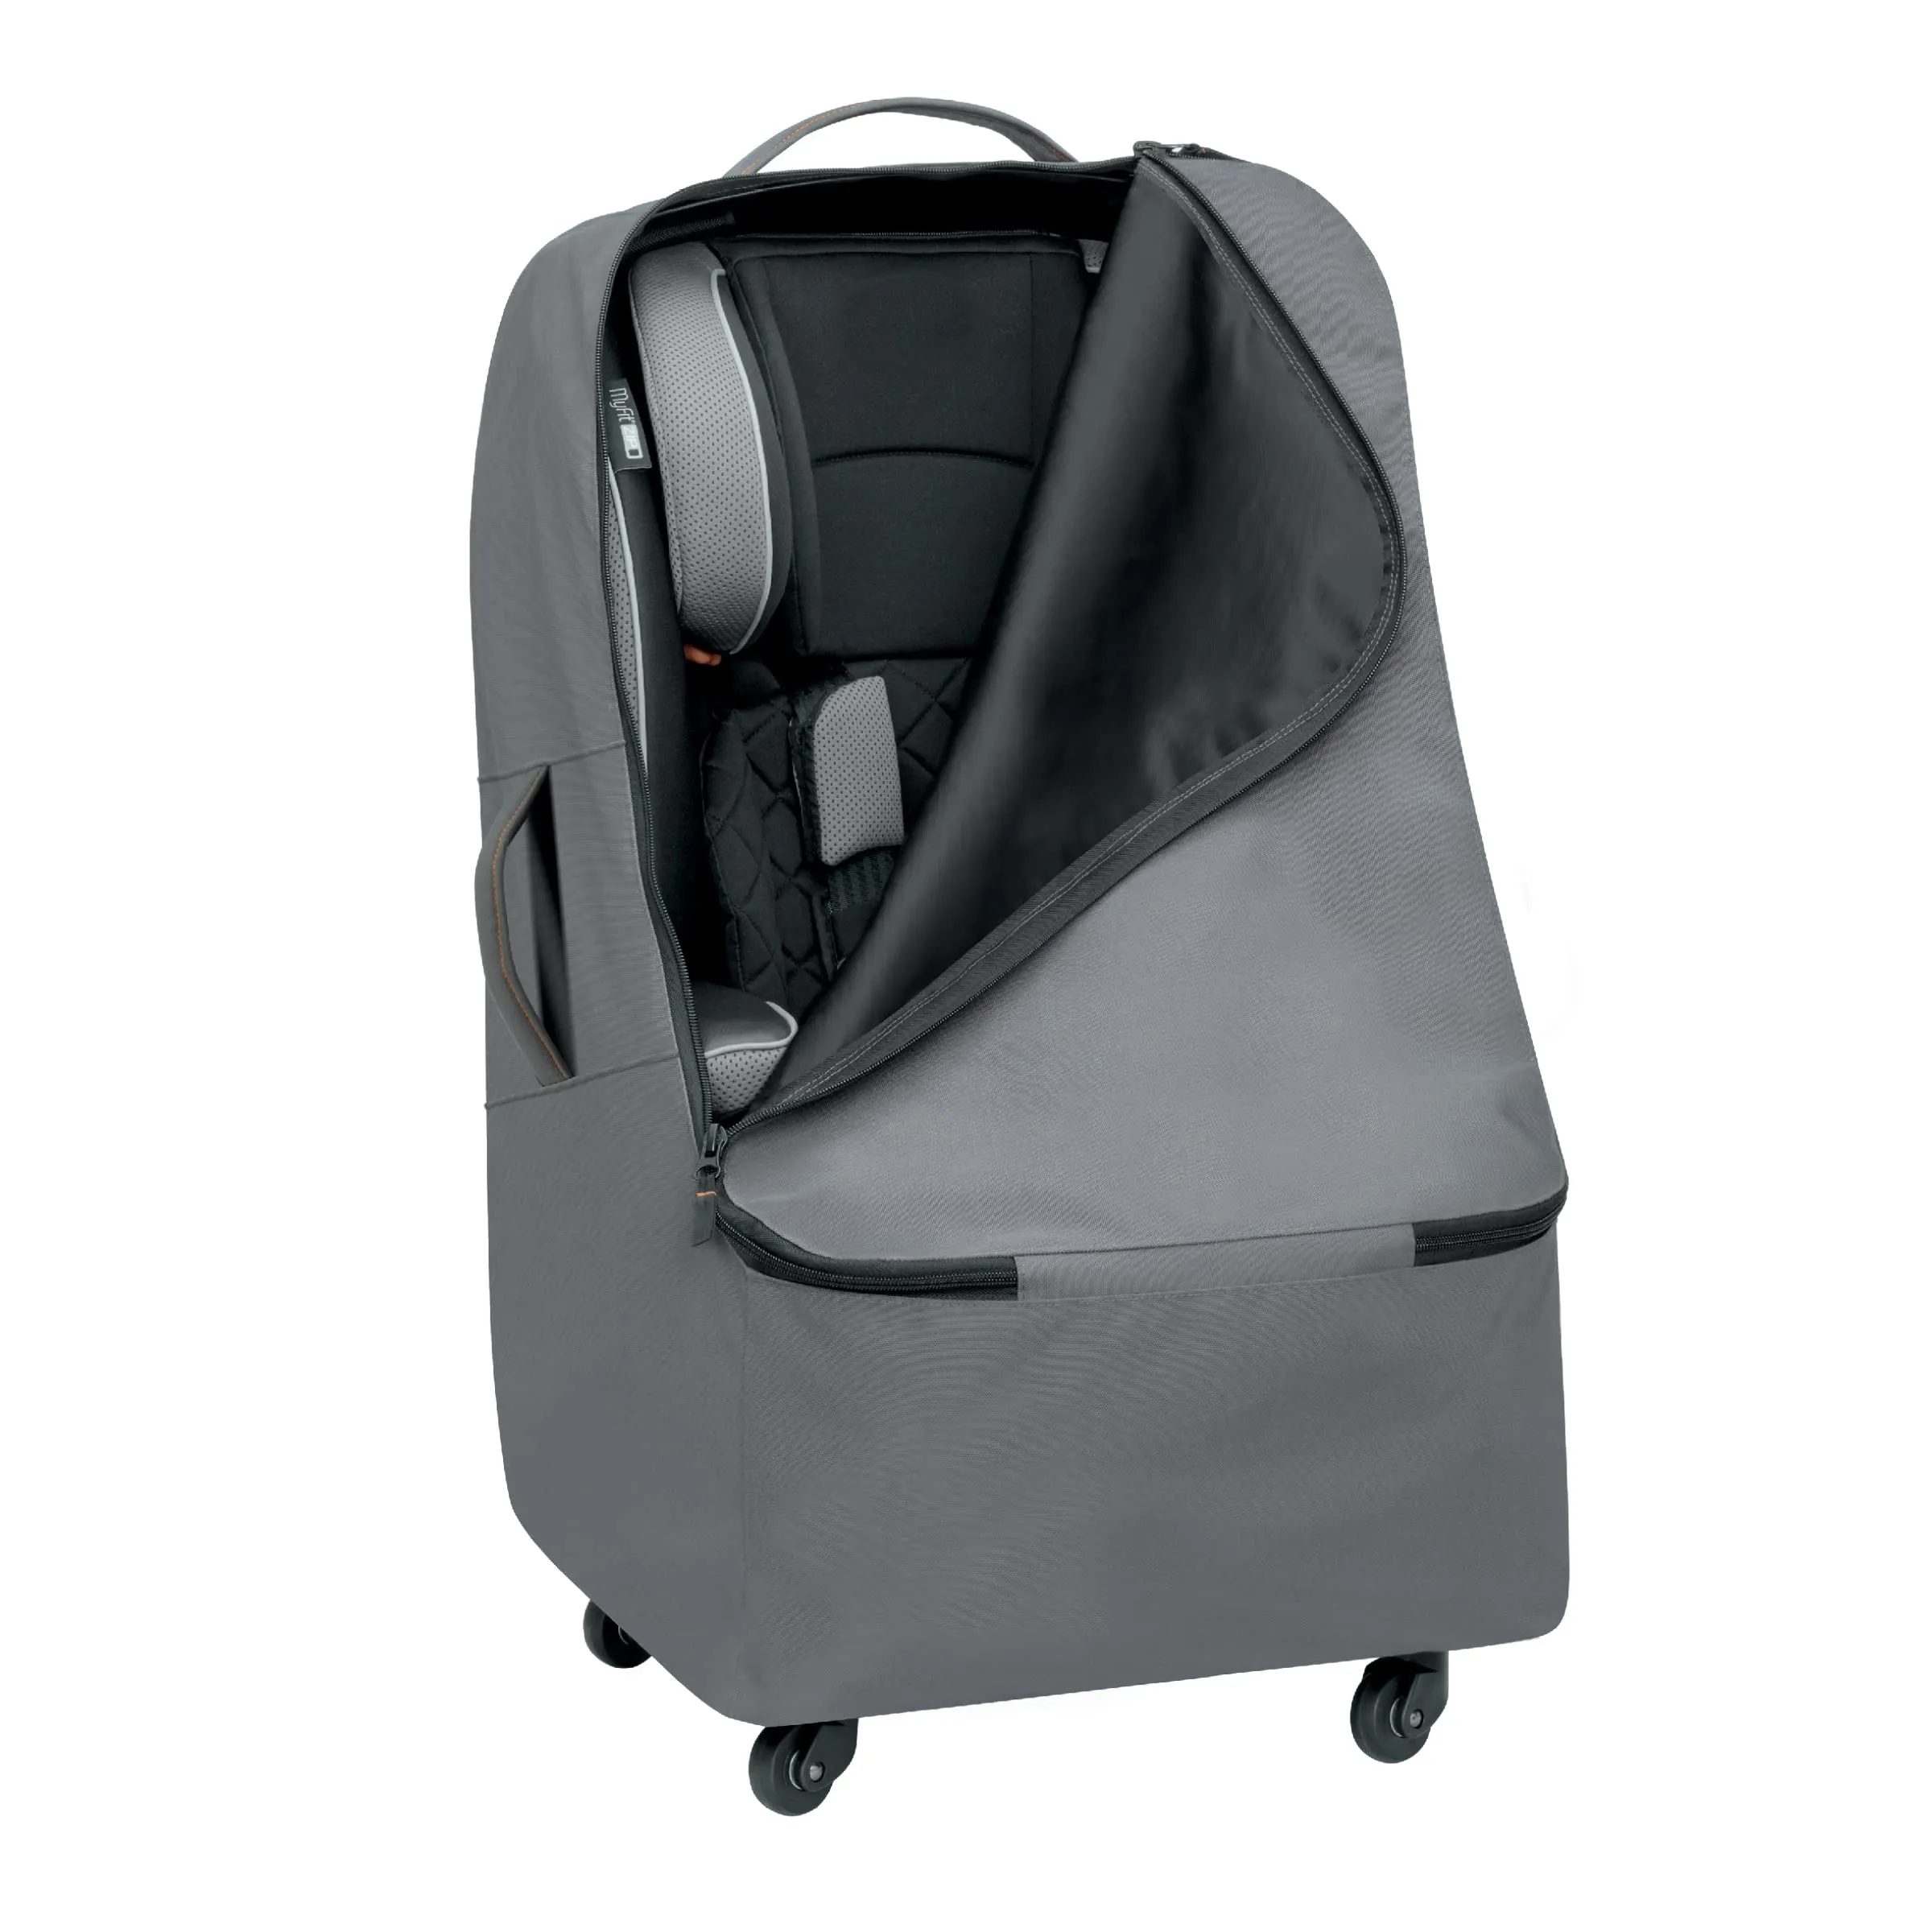 Amazon Hot Sale Car Seat Travel Bag with Wheels Car Seats Backpack For Airport Gate Check Bag